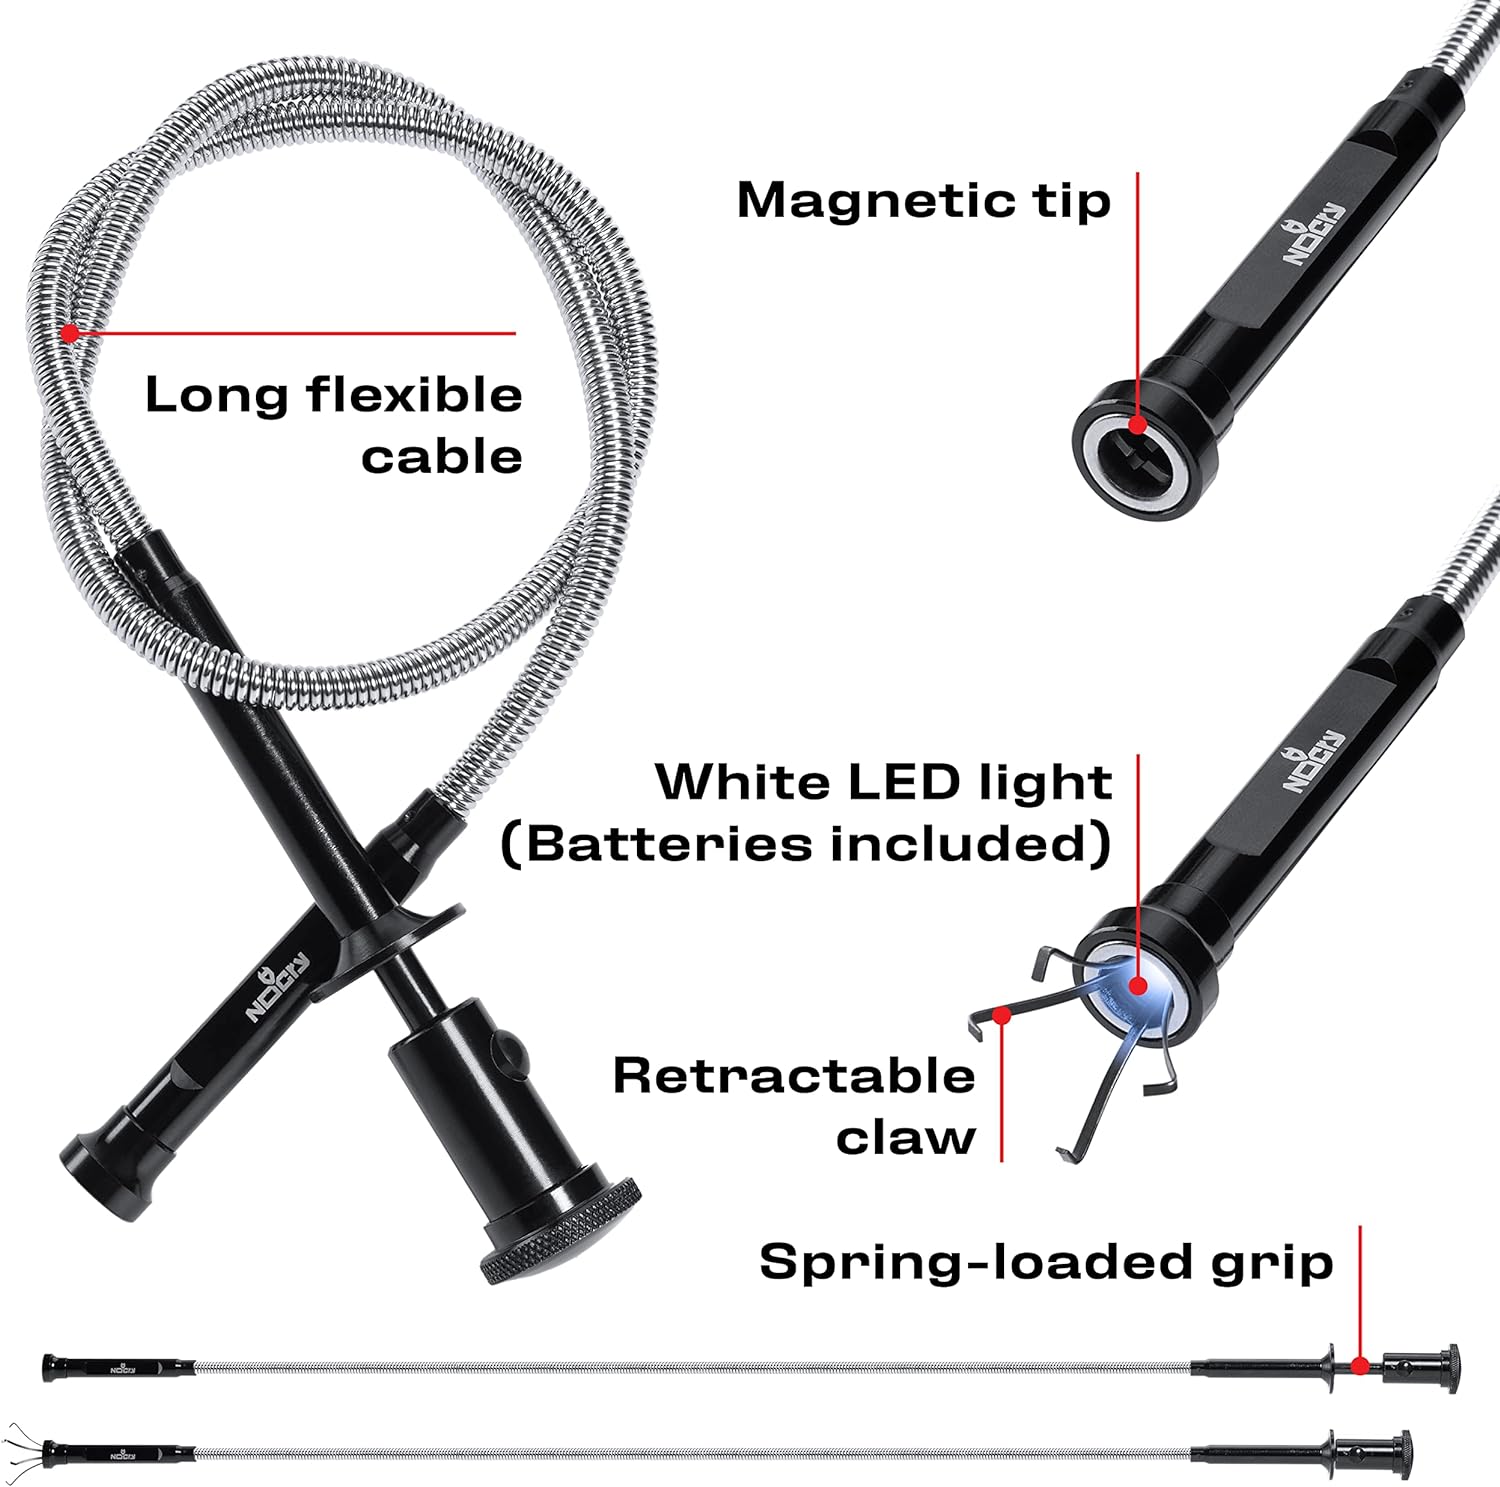 Generic NoCry Magnetic 27.7in Grabber Tool with an Extra Long, Flexible Cable; Comes with a Retractable Claw Grabber, Bright LED light